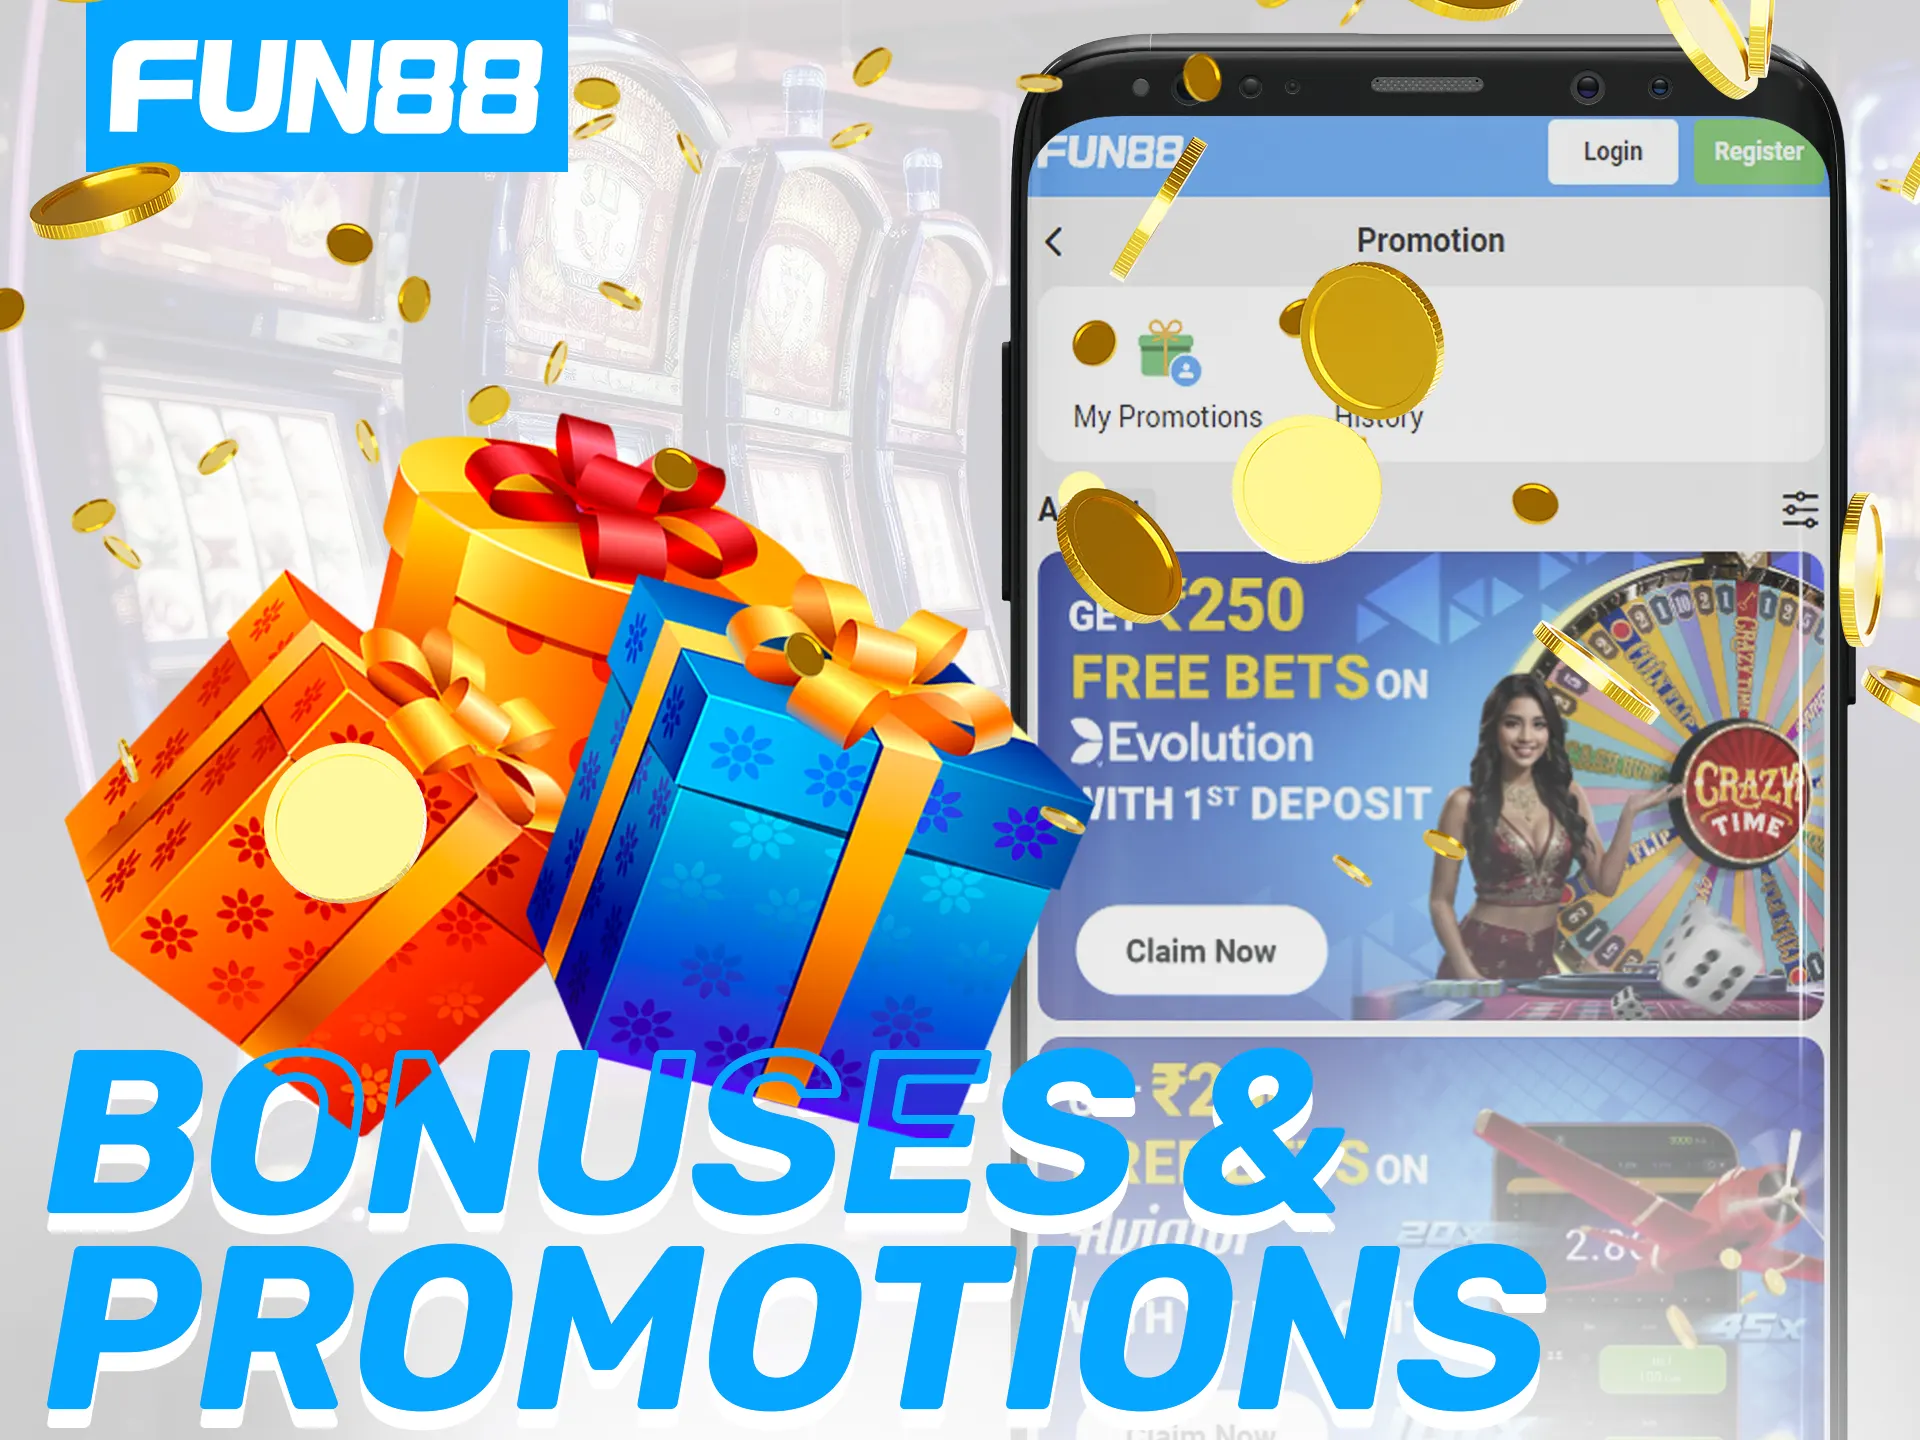 Fun88 app features various bonuses, including free rounds, welcome bonuses, and reload offers.